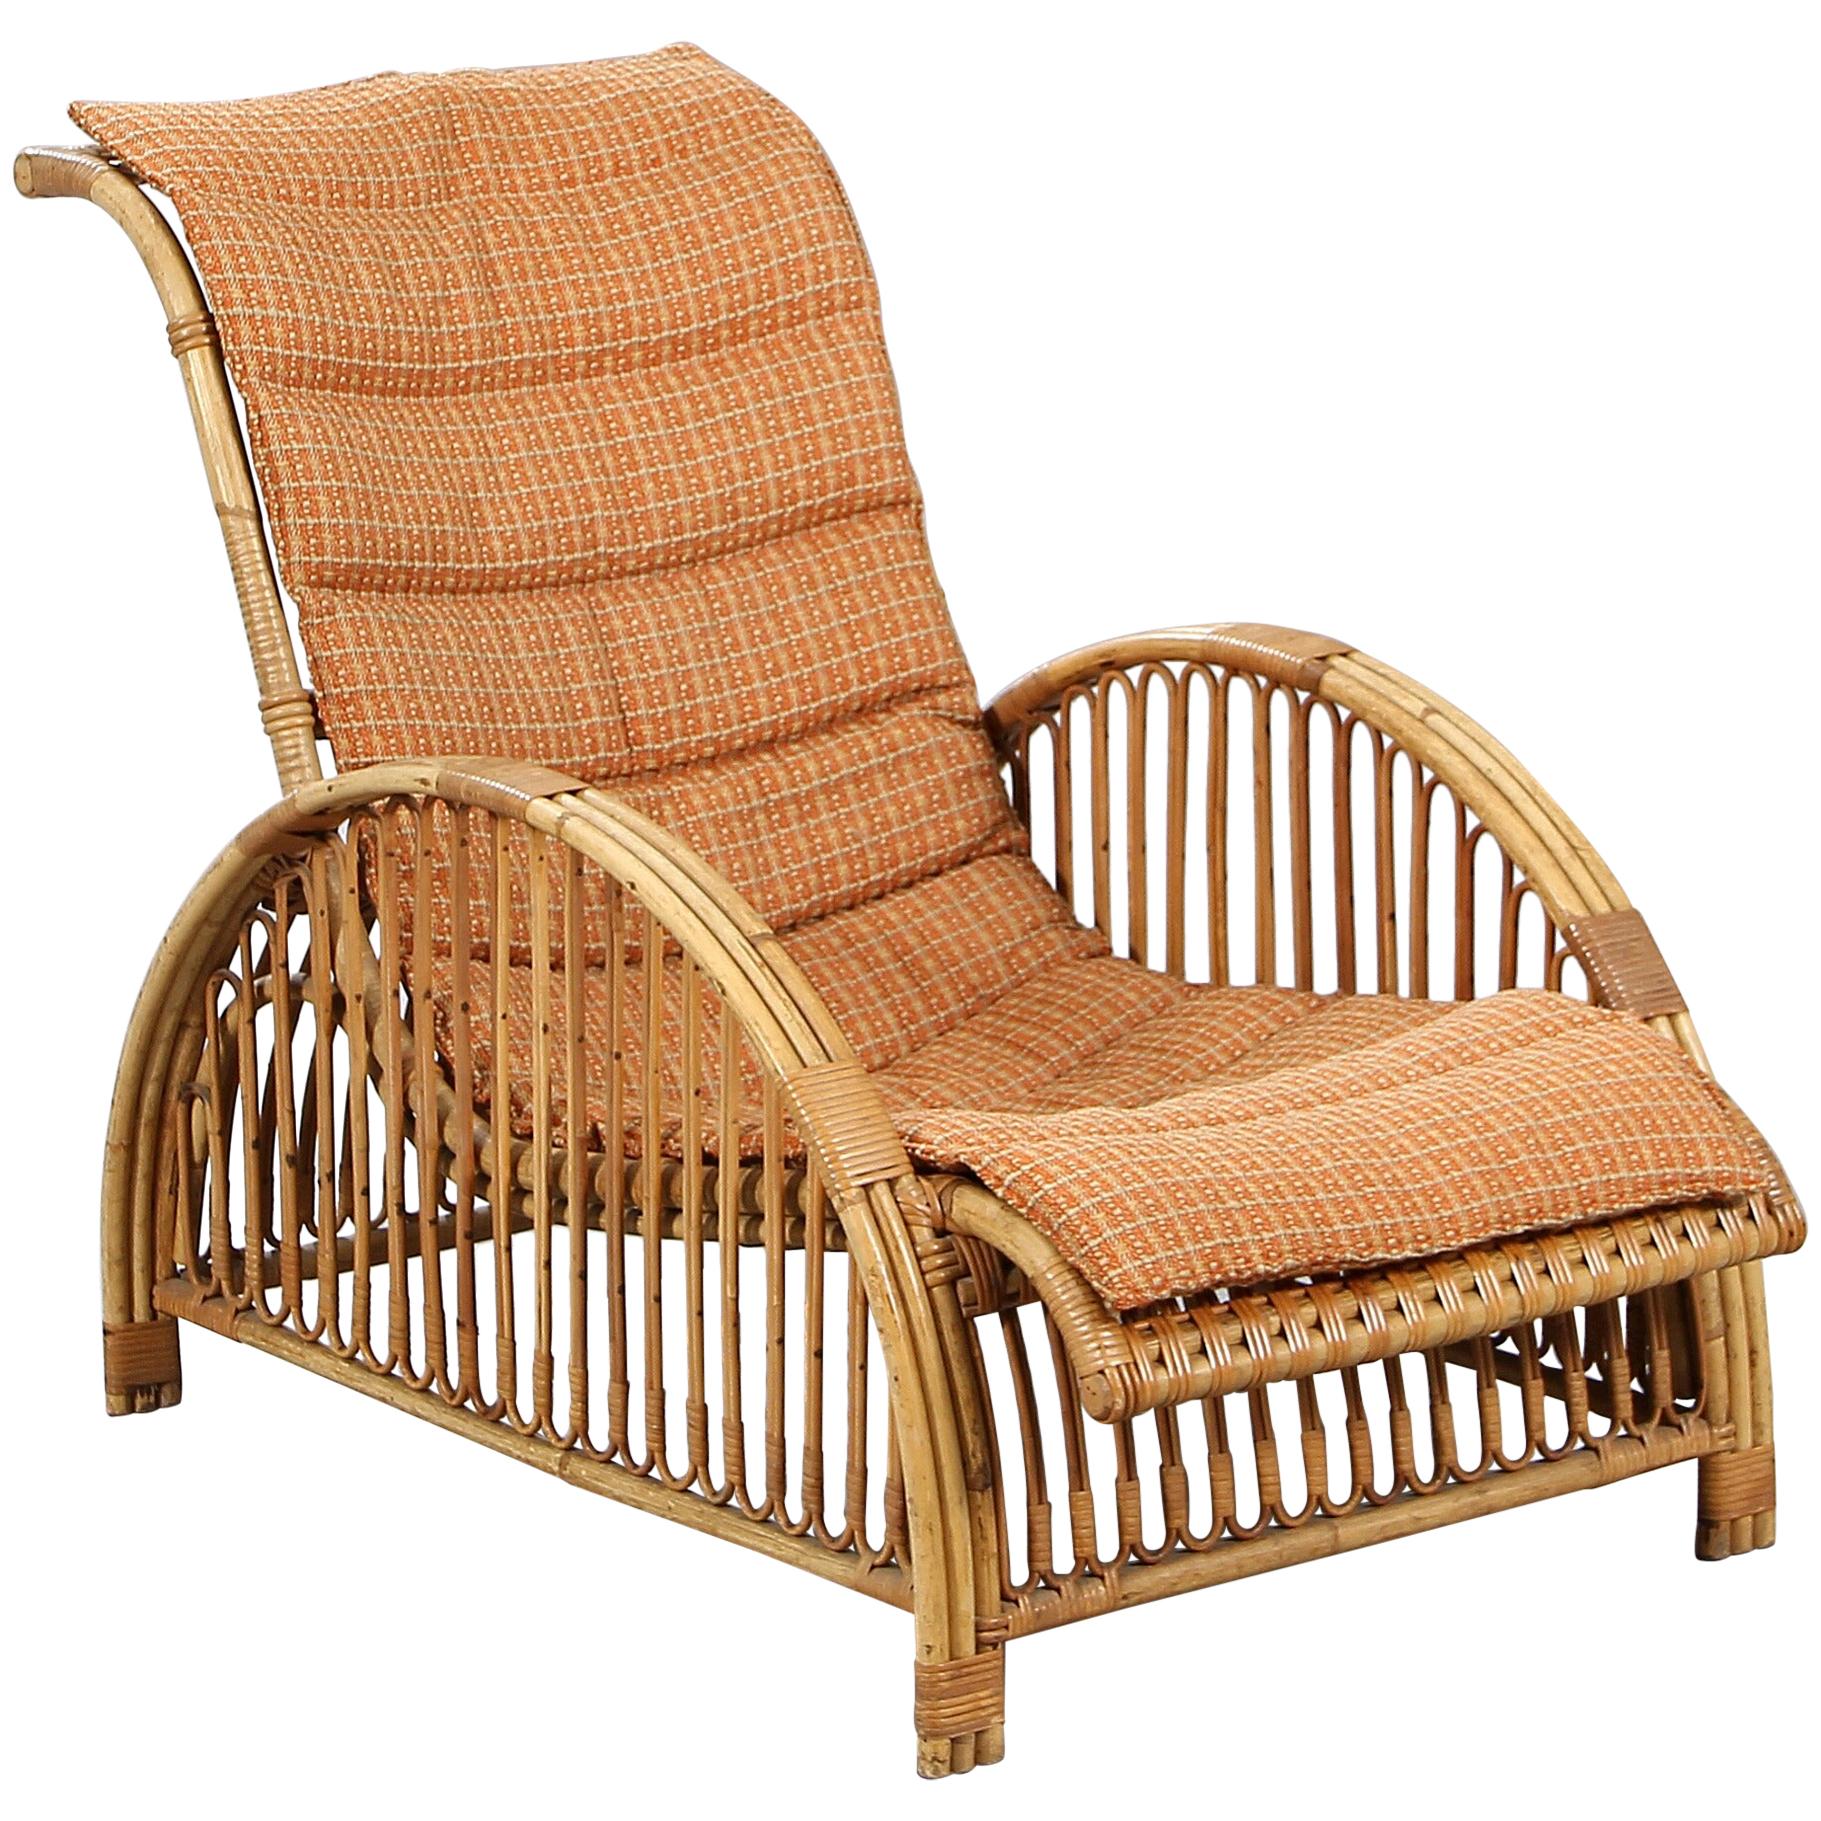 Arne Jacobsen “Paris Chair”, Easy Chair with Frame of Bamboo with Woven Cane im Angebot